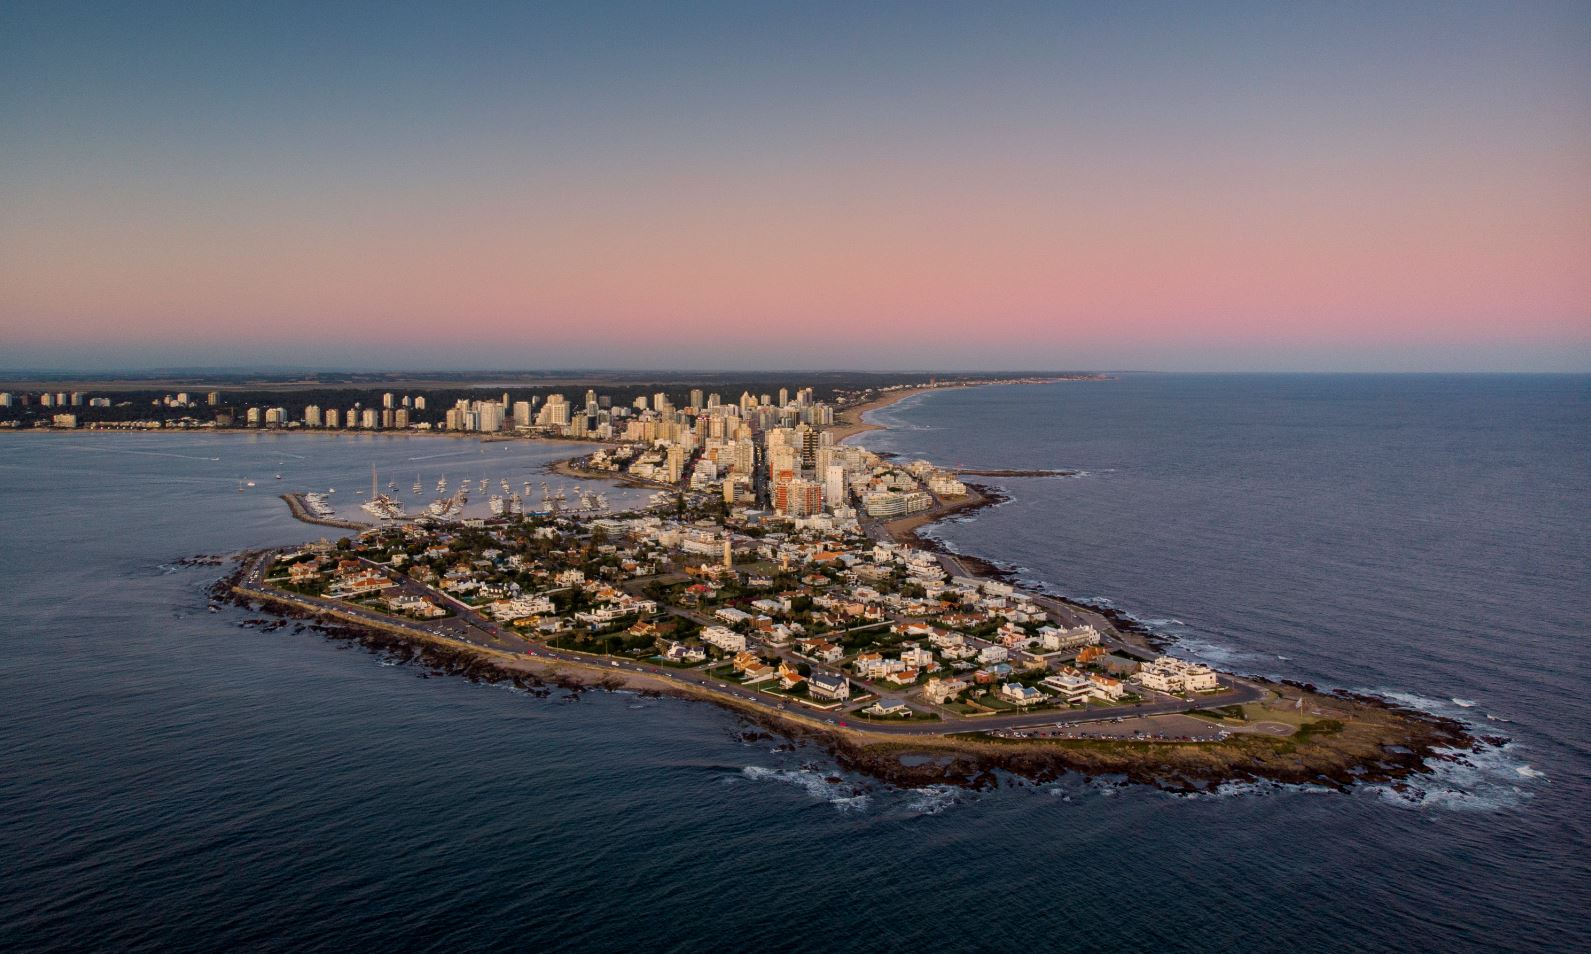 The migratory phenomenon turned Punta del Este from a "beach town" into a "year-round city".